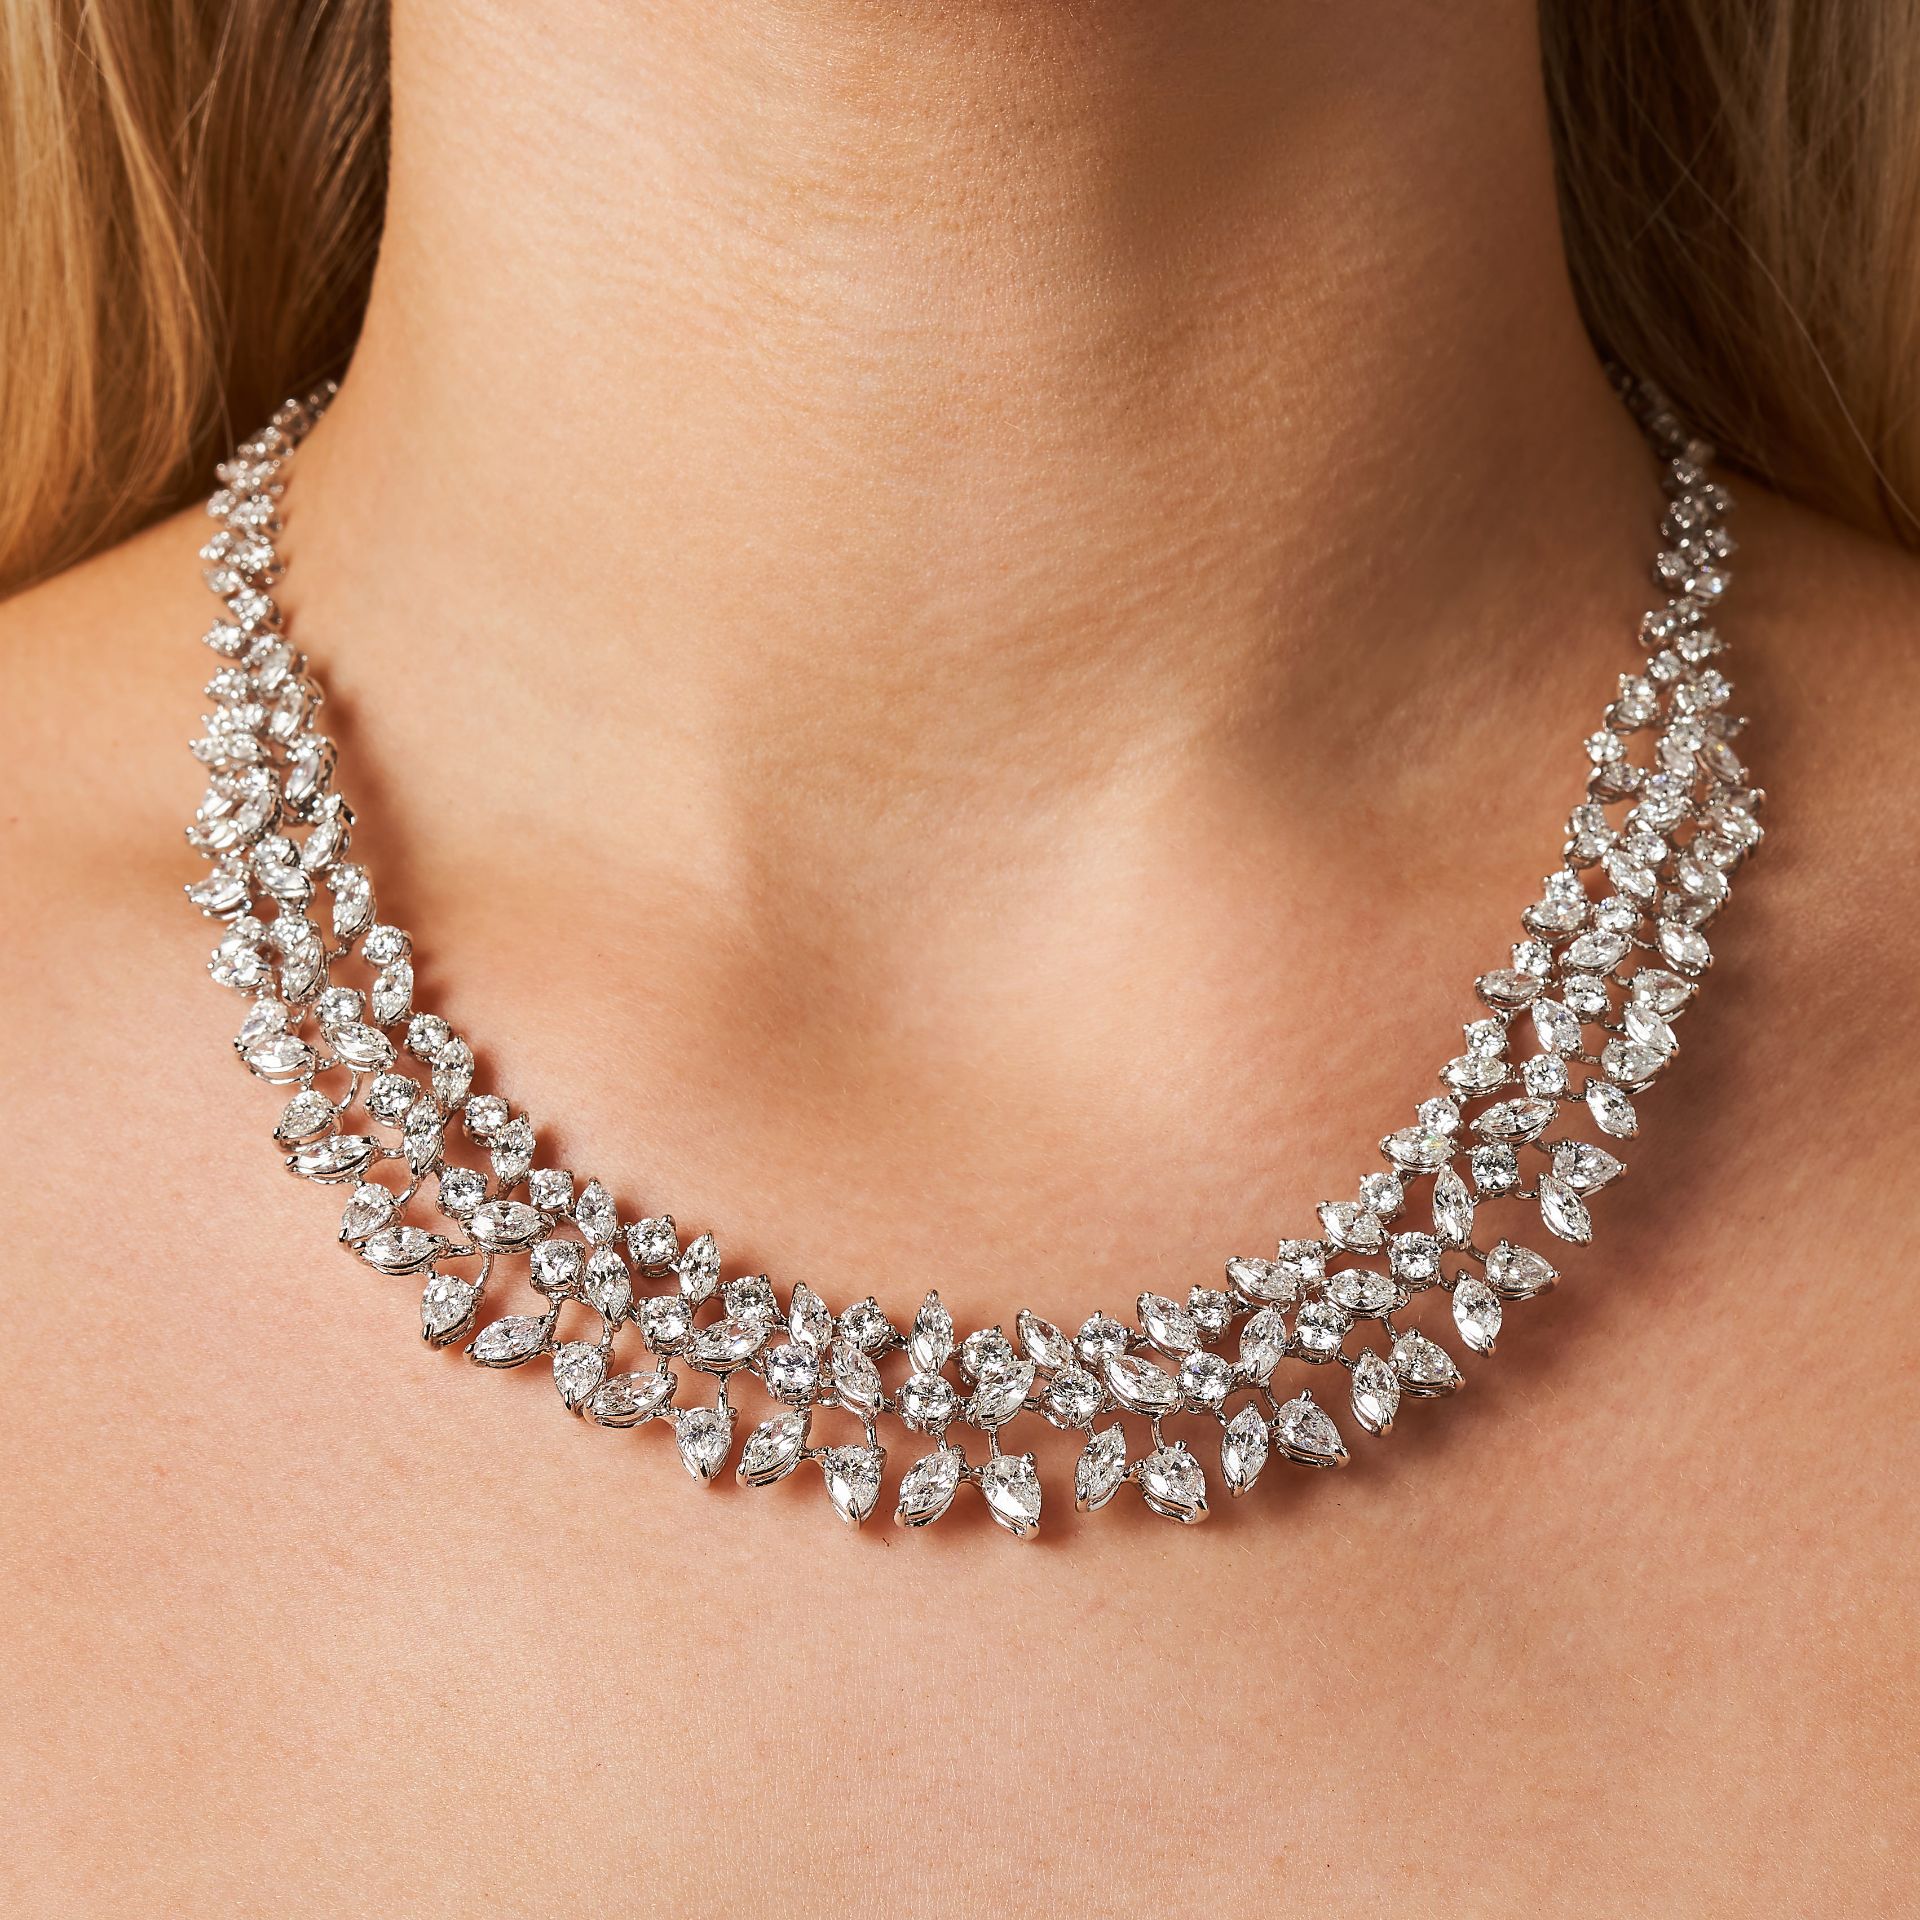 A 30.58 CARAT DIAMOND NECKLACE set throughout with marquise, pear and round brilliant cut diamond...